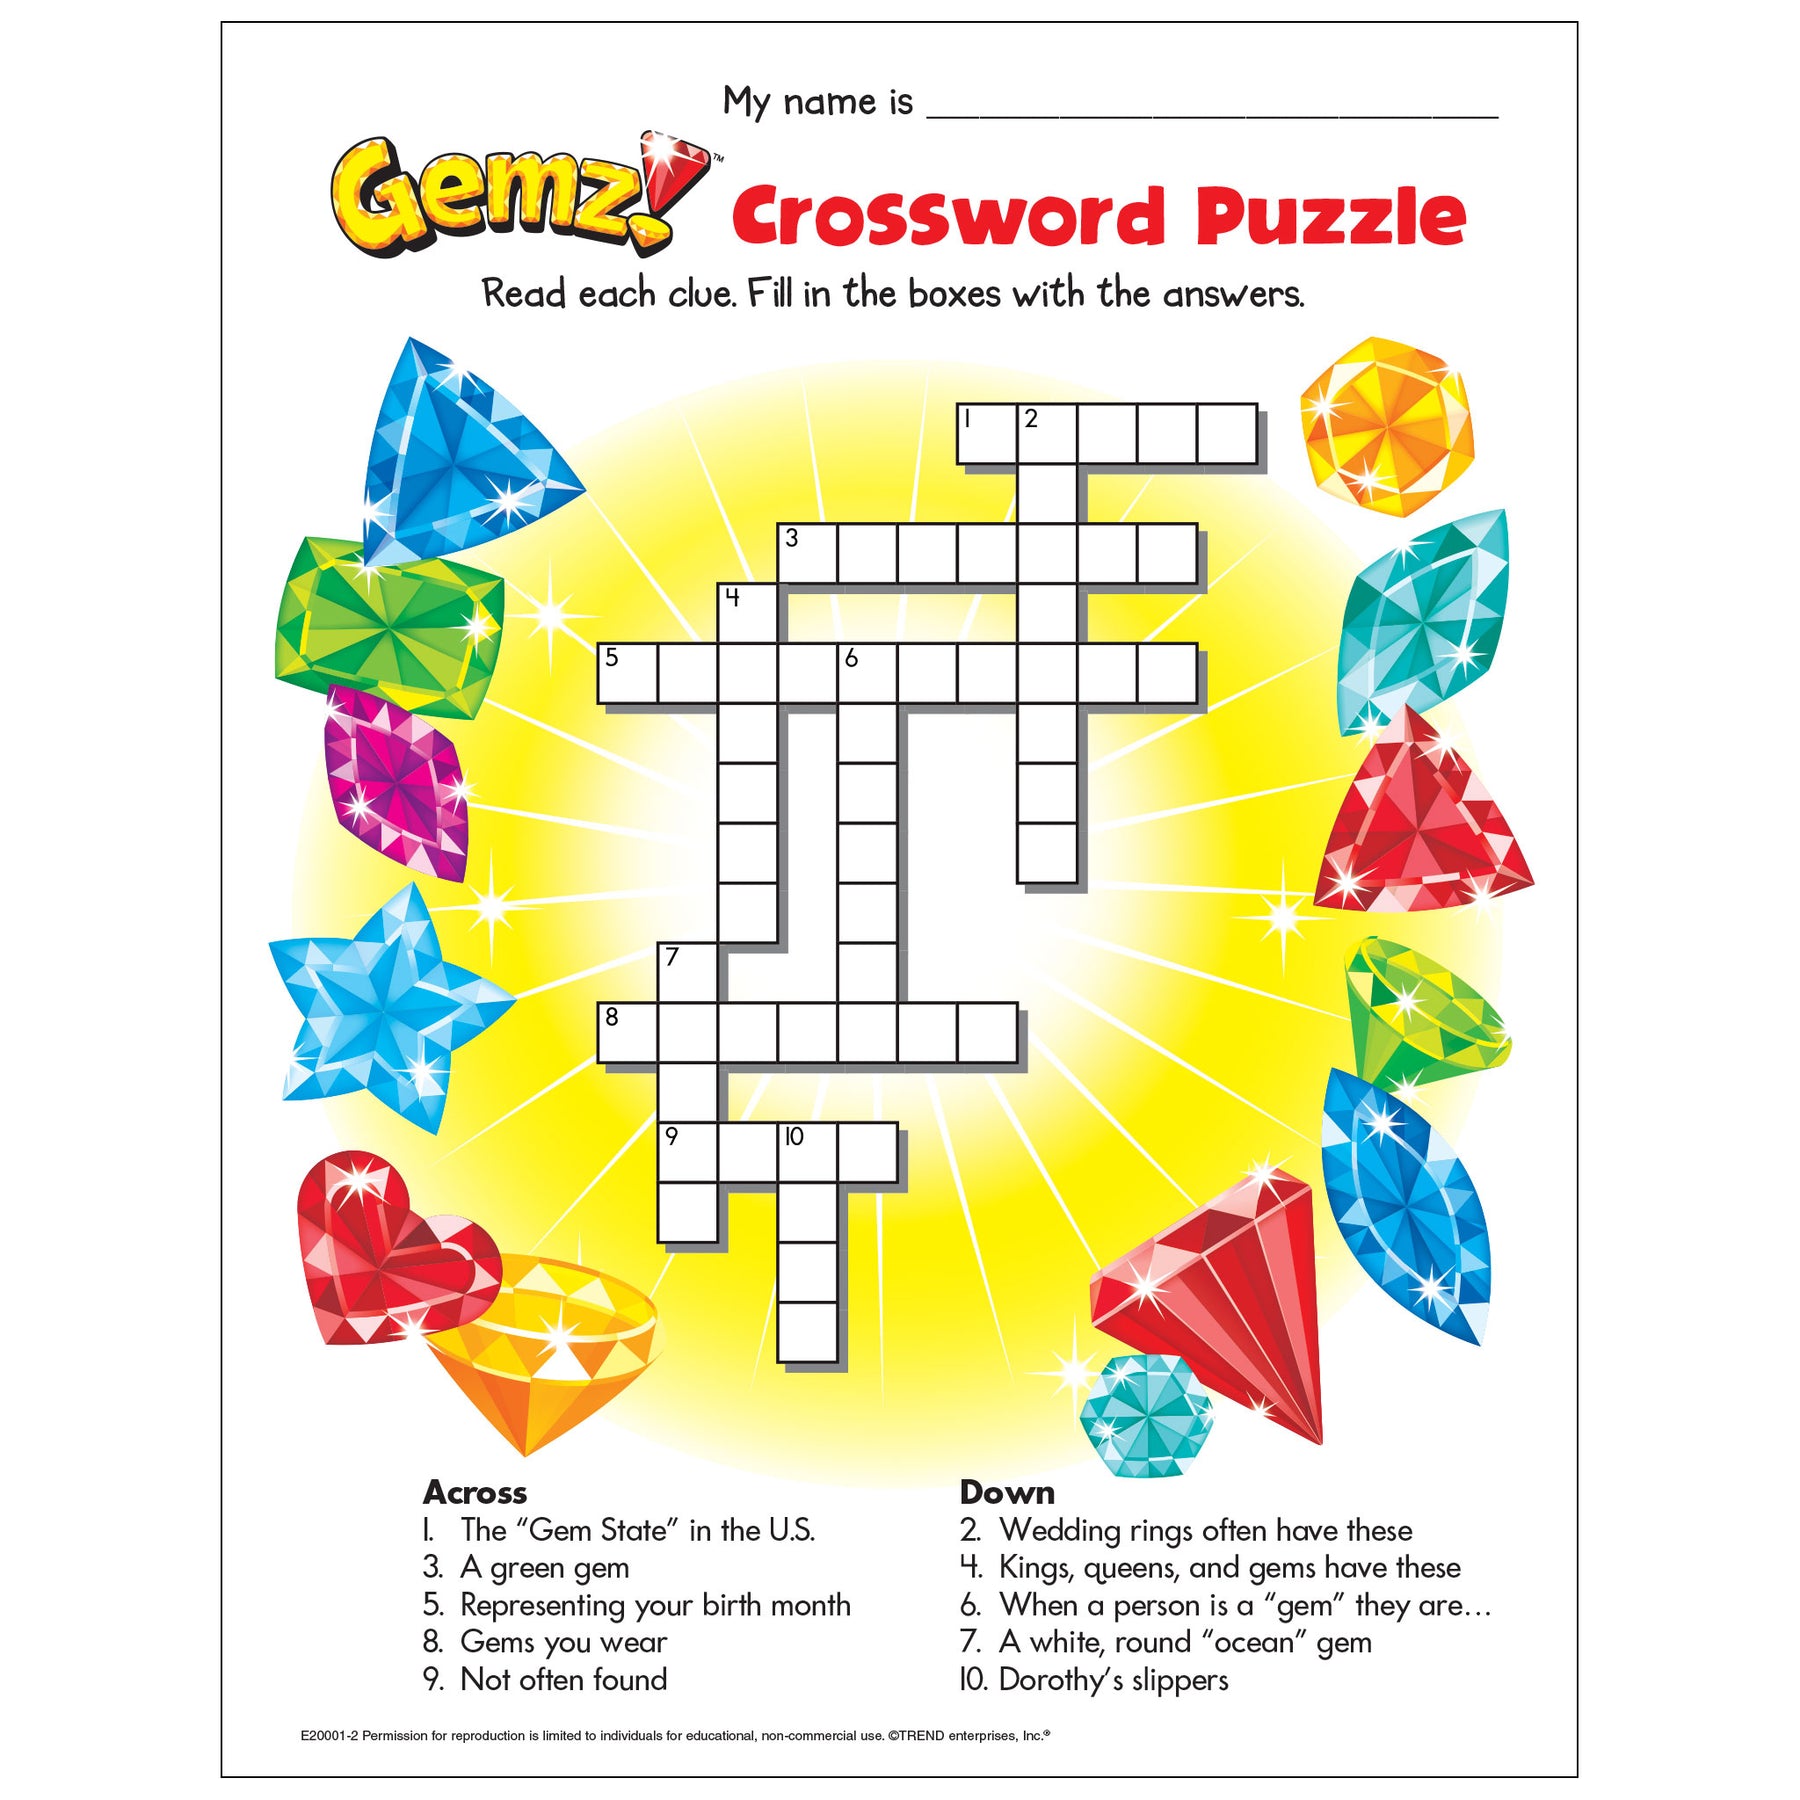 Crossword Puzzles Printable, Fun and Free!